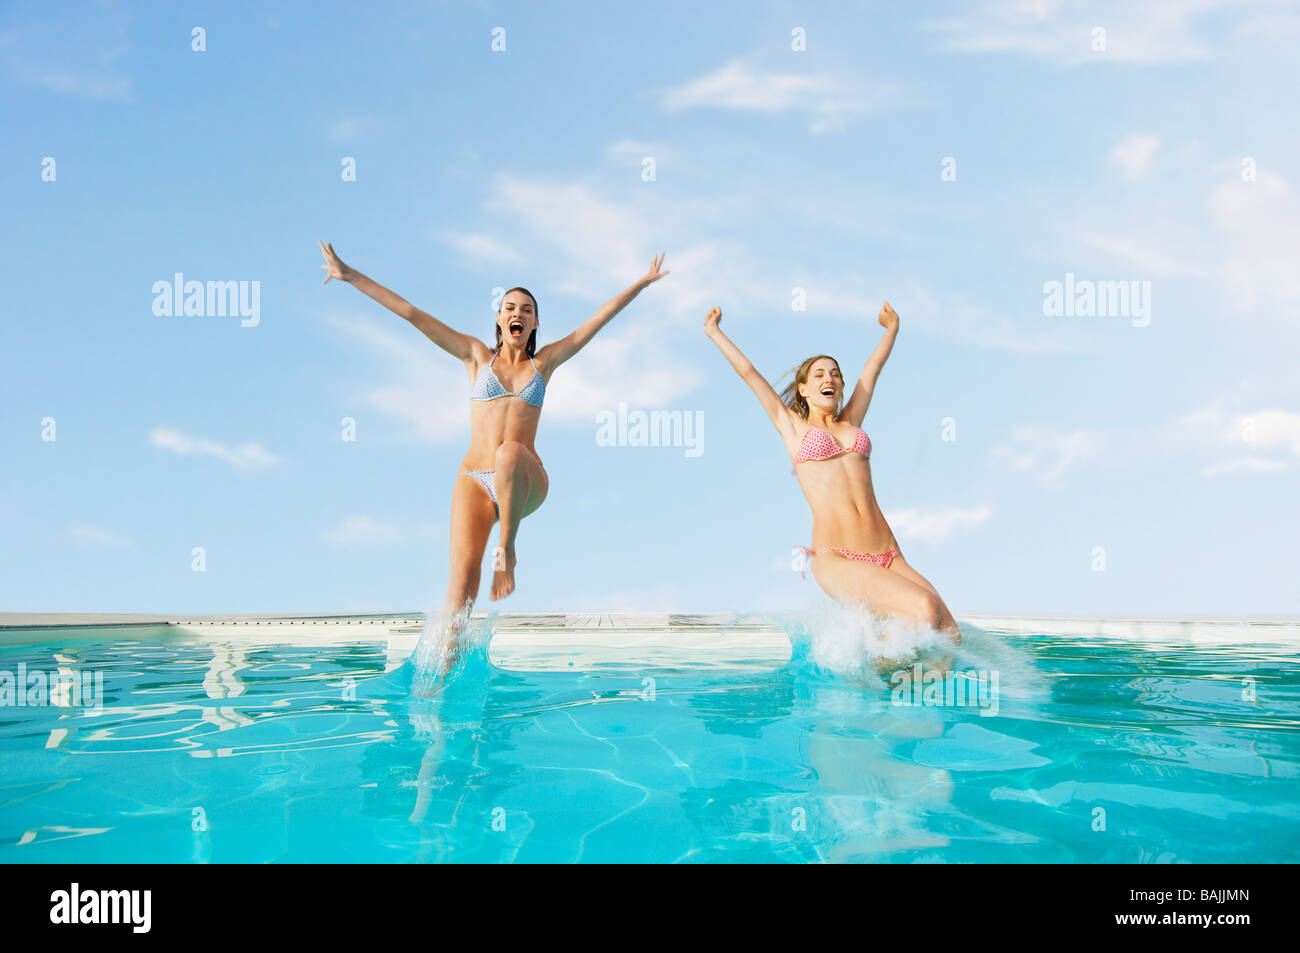 Young Women Jumping into Swimming Pool, front view Stock Photo